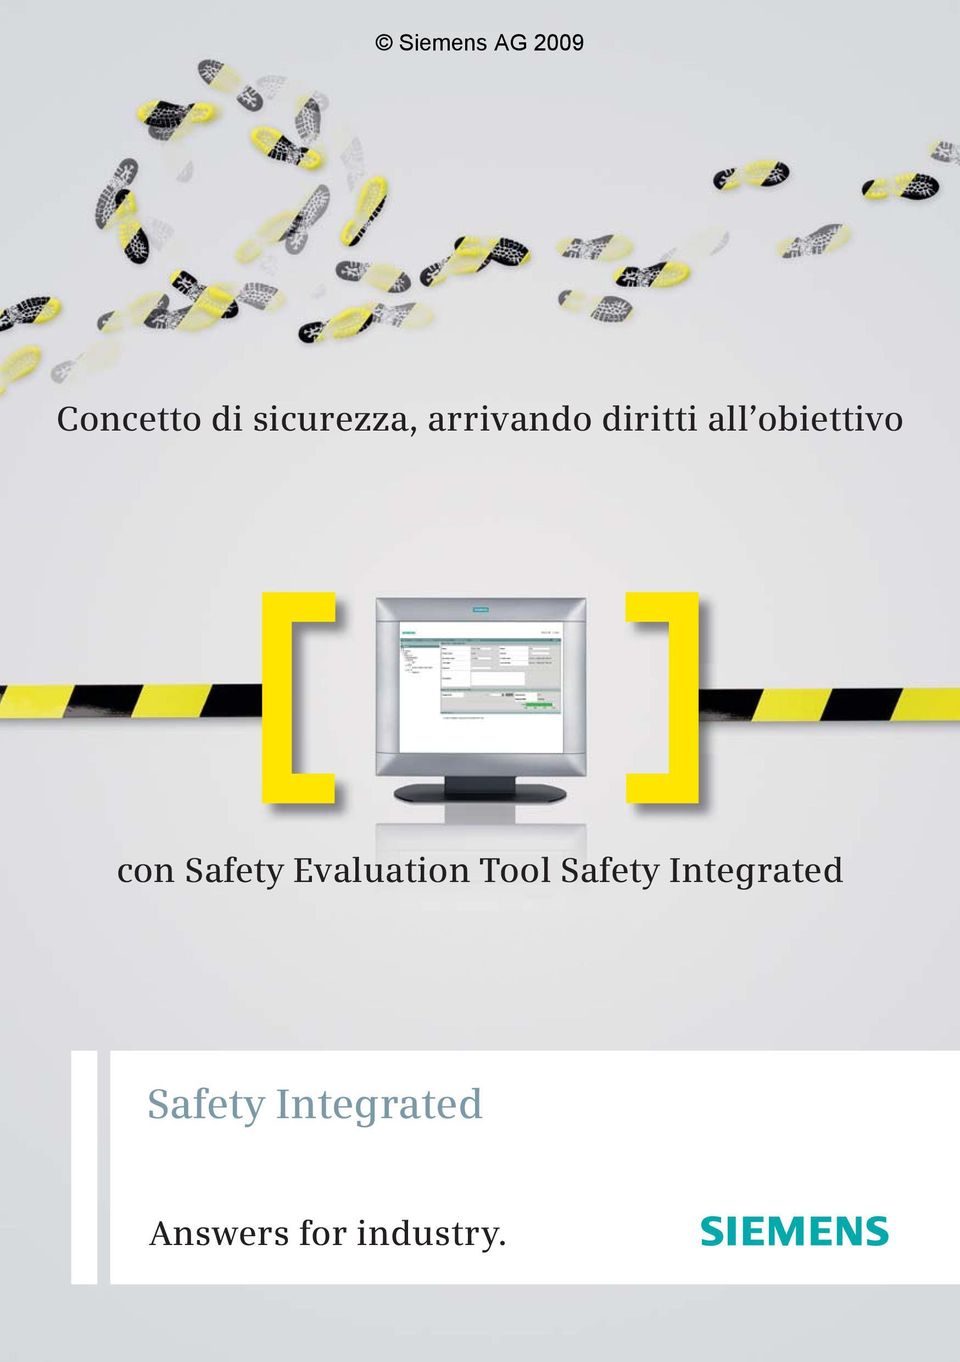 Evaluation Tool Safety Integrated